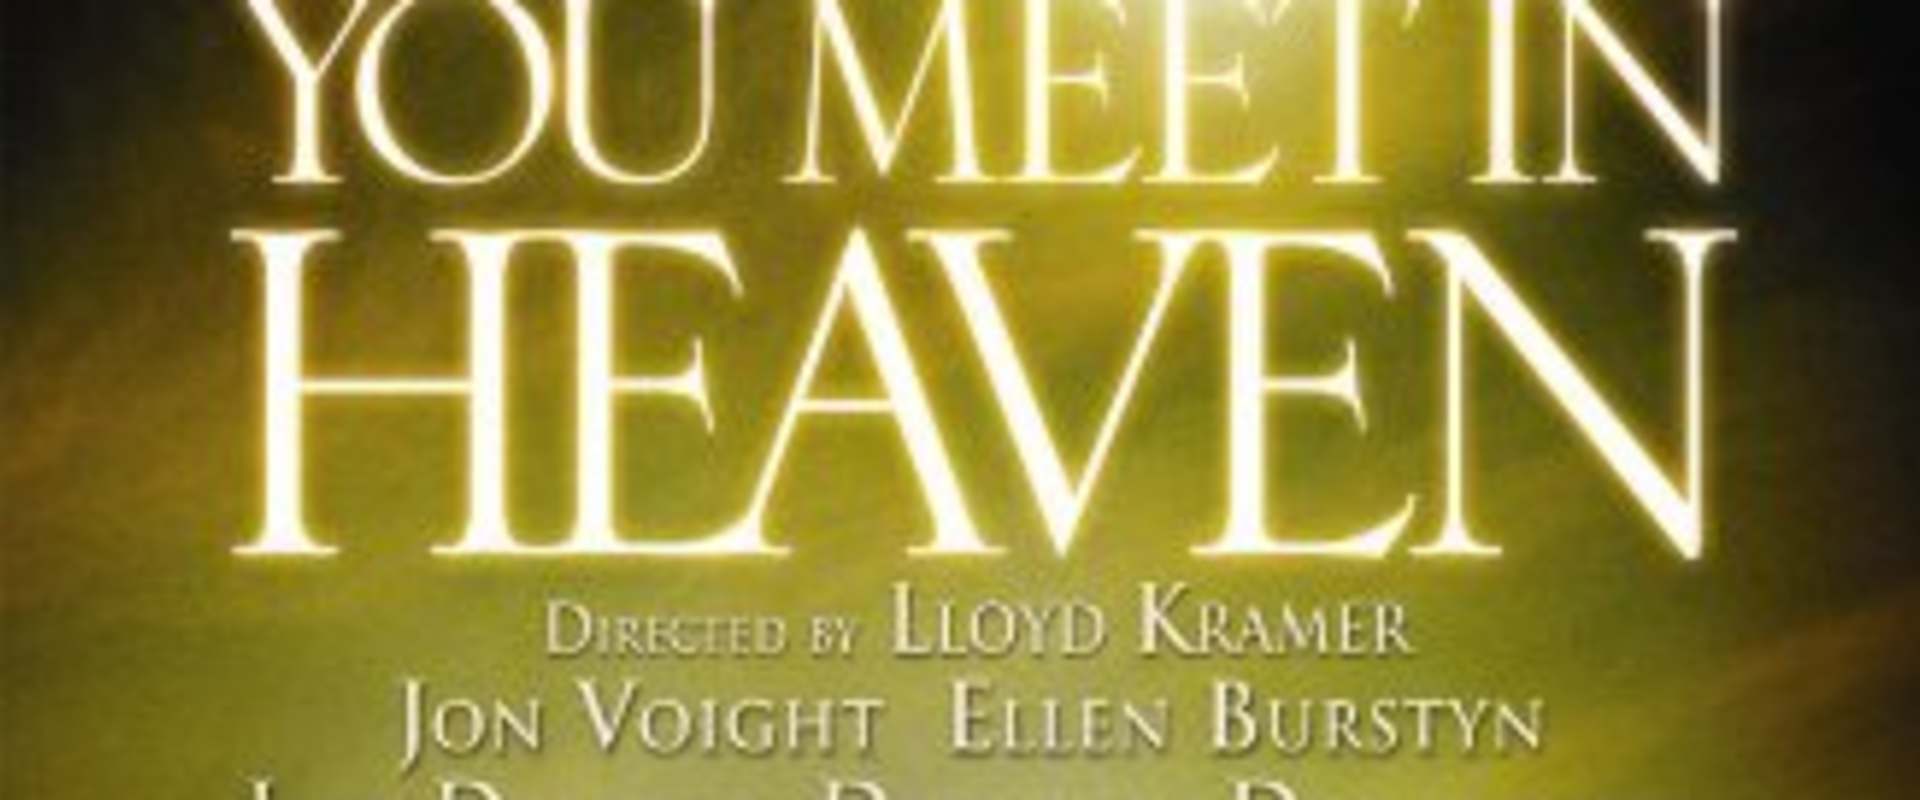 the five person you meet in heaven movie